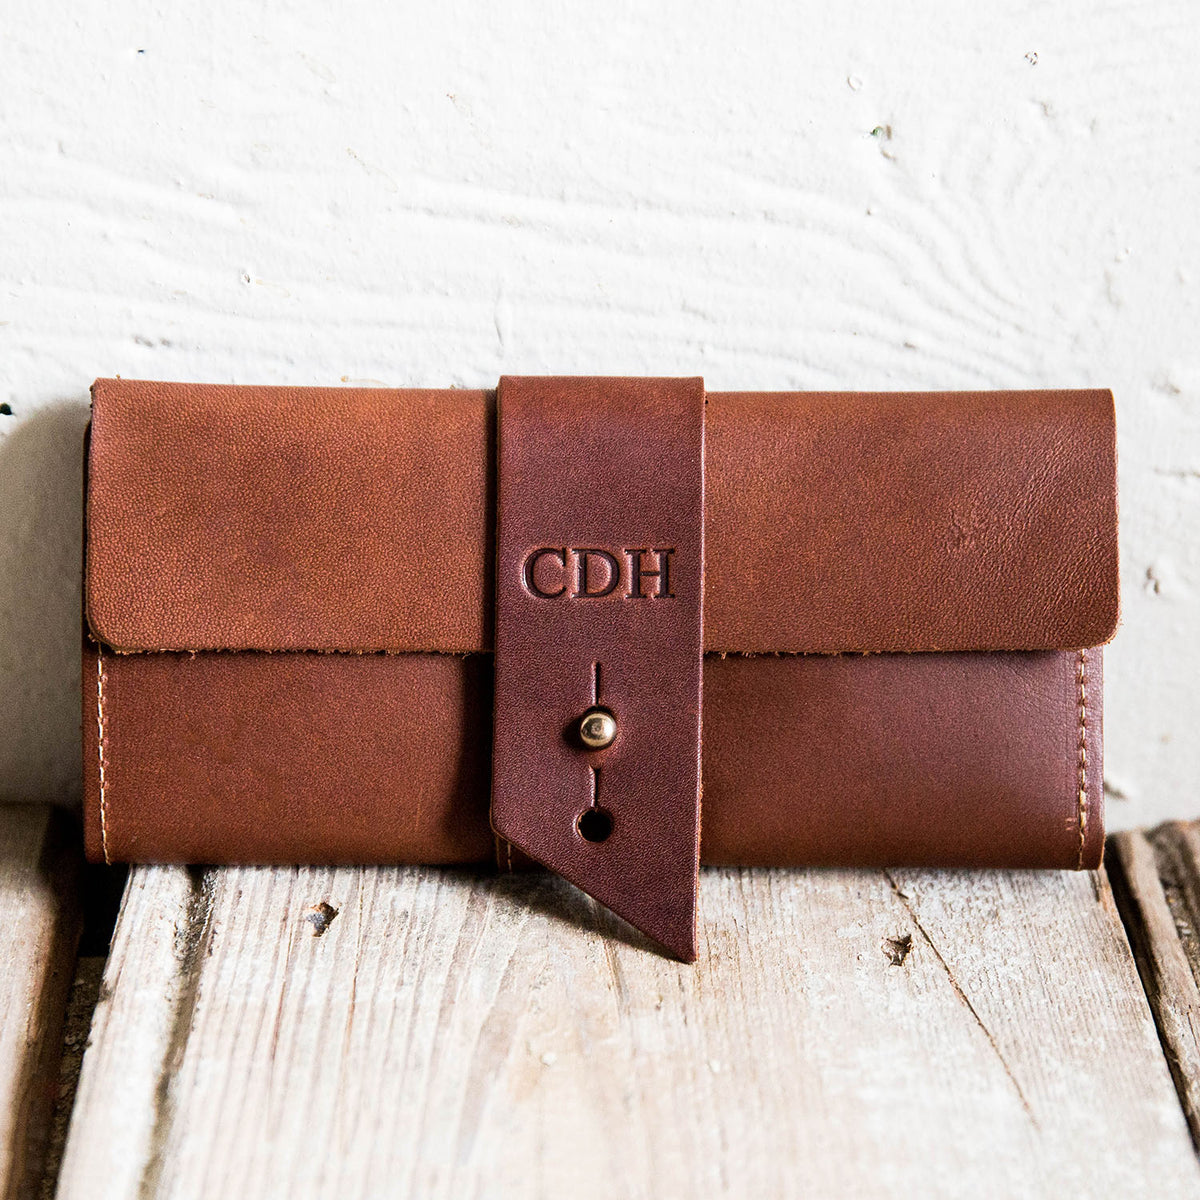 Fine leather pocketbook and checkbook with personalized initials from Holtz Leather Co in Huntsville, Alabama